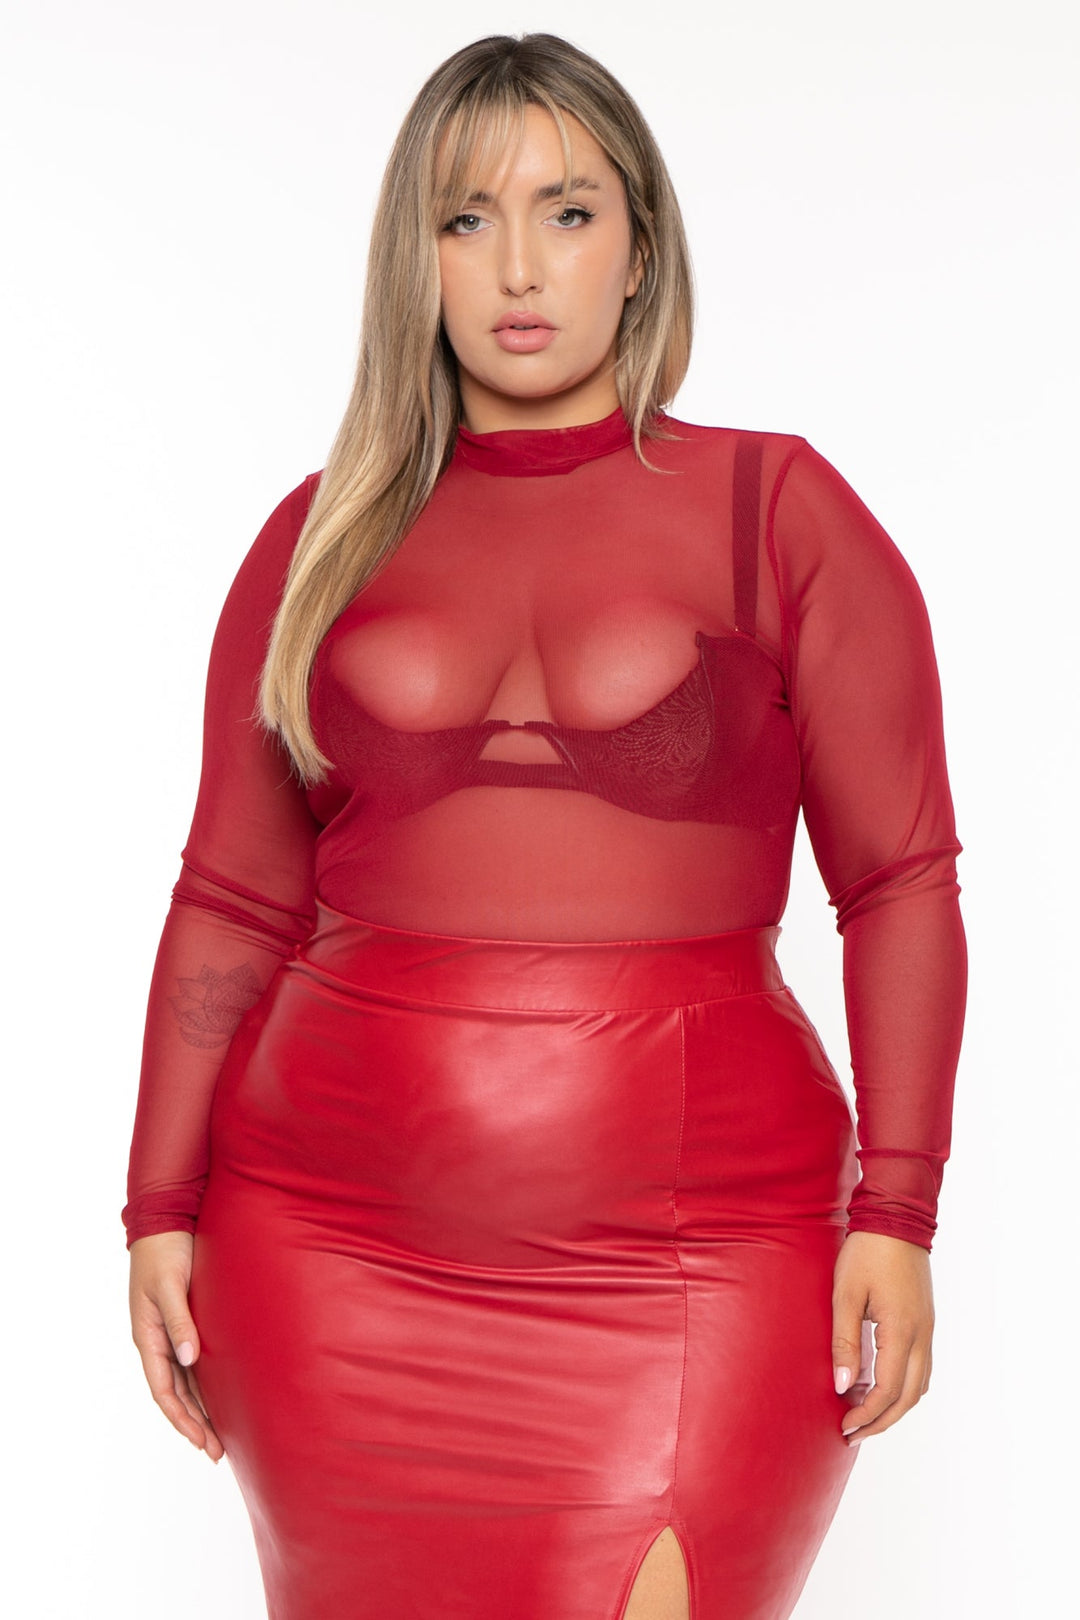 Curvy Sense on X: We know yall chilling at home, but do in faux leather  catsuit. #curvysense #curvysensedoll  / X